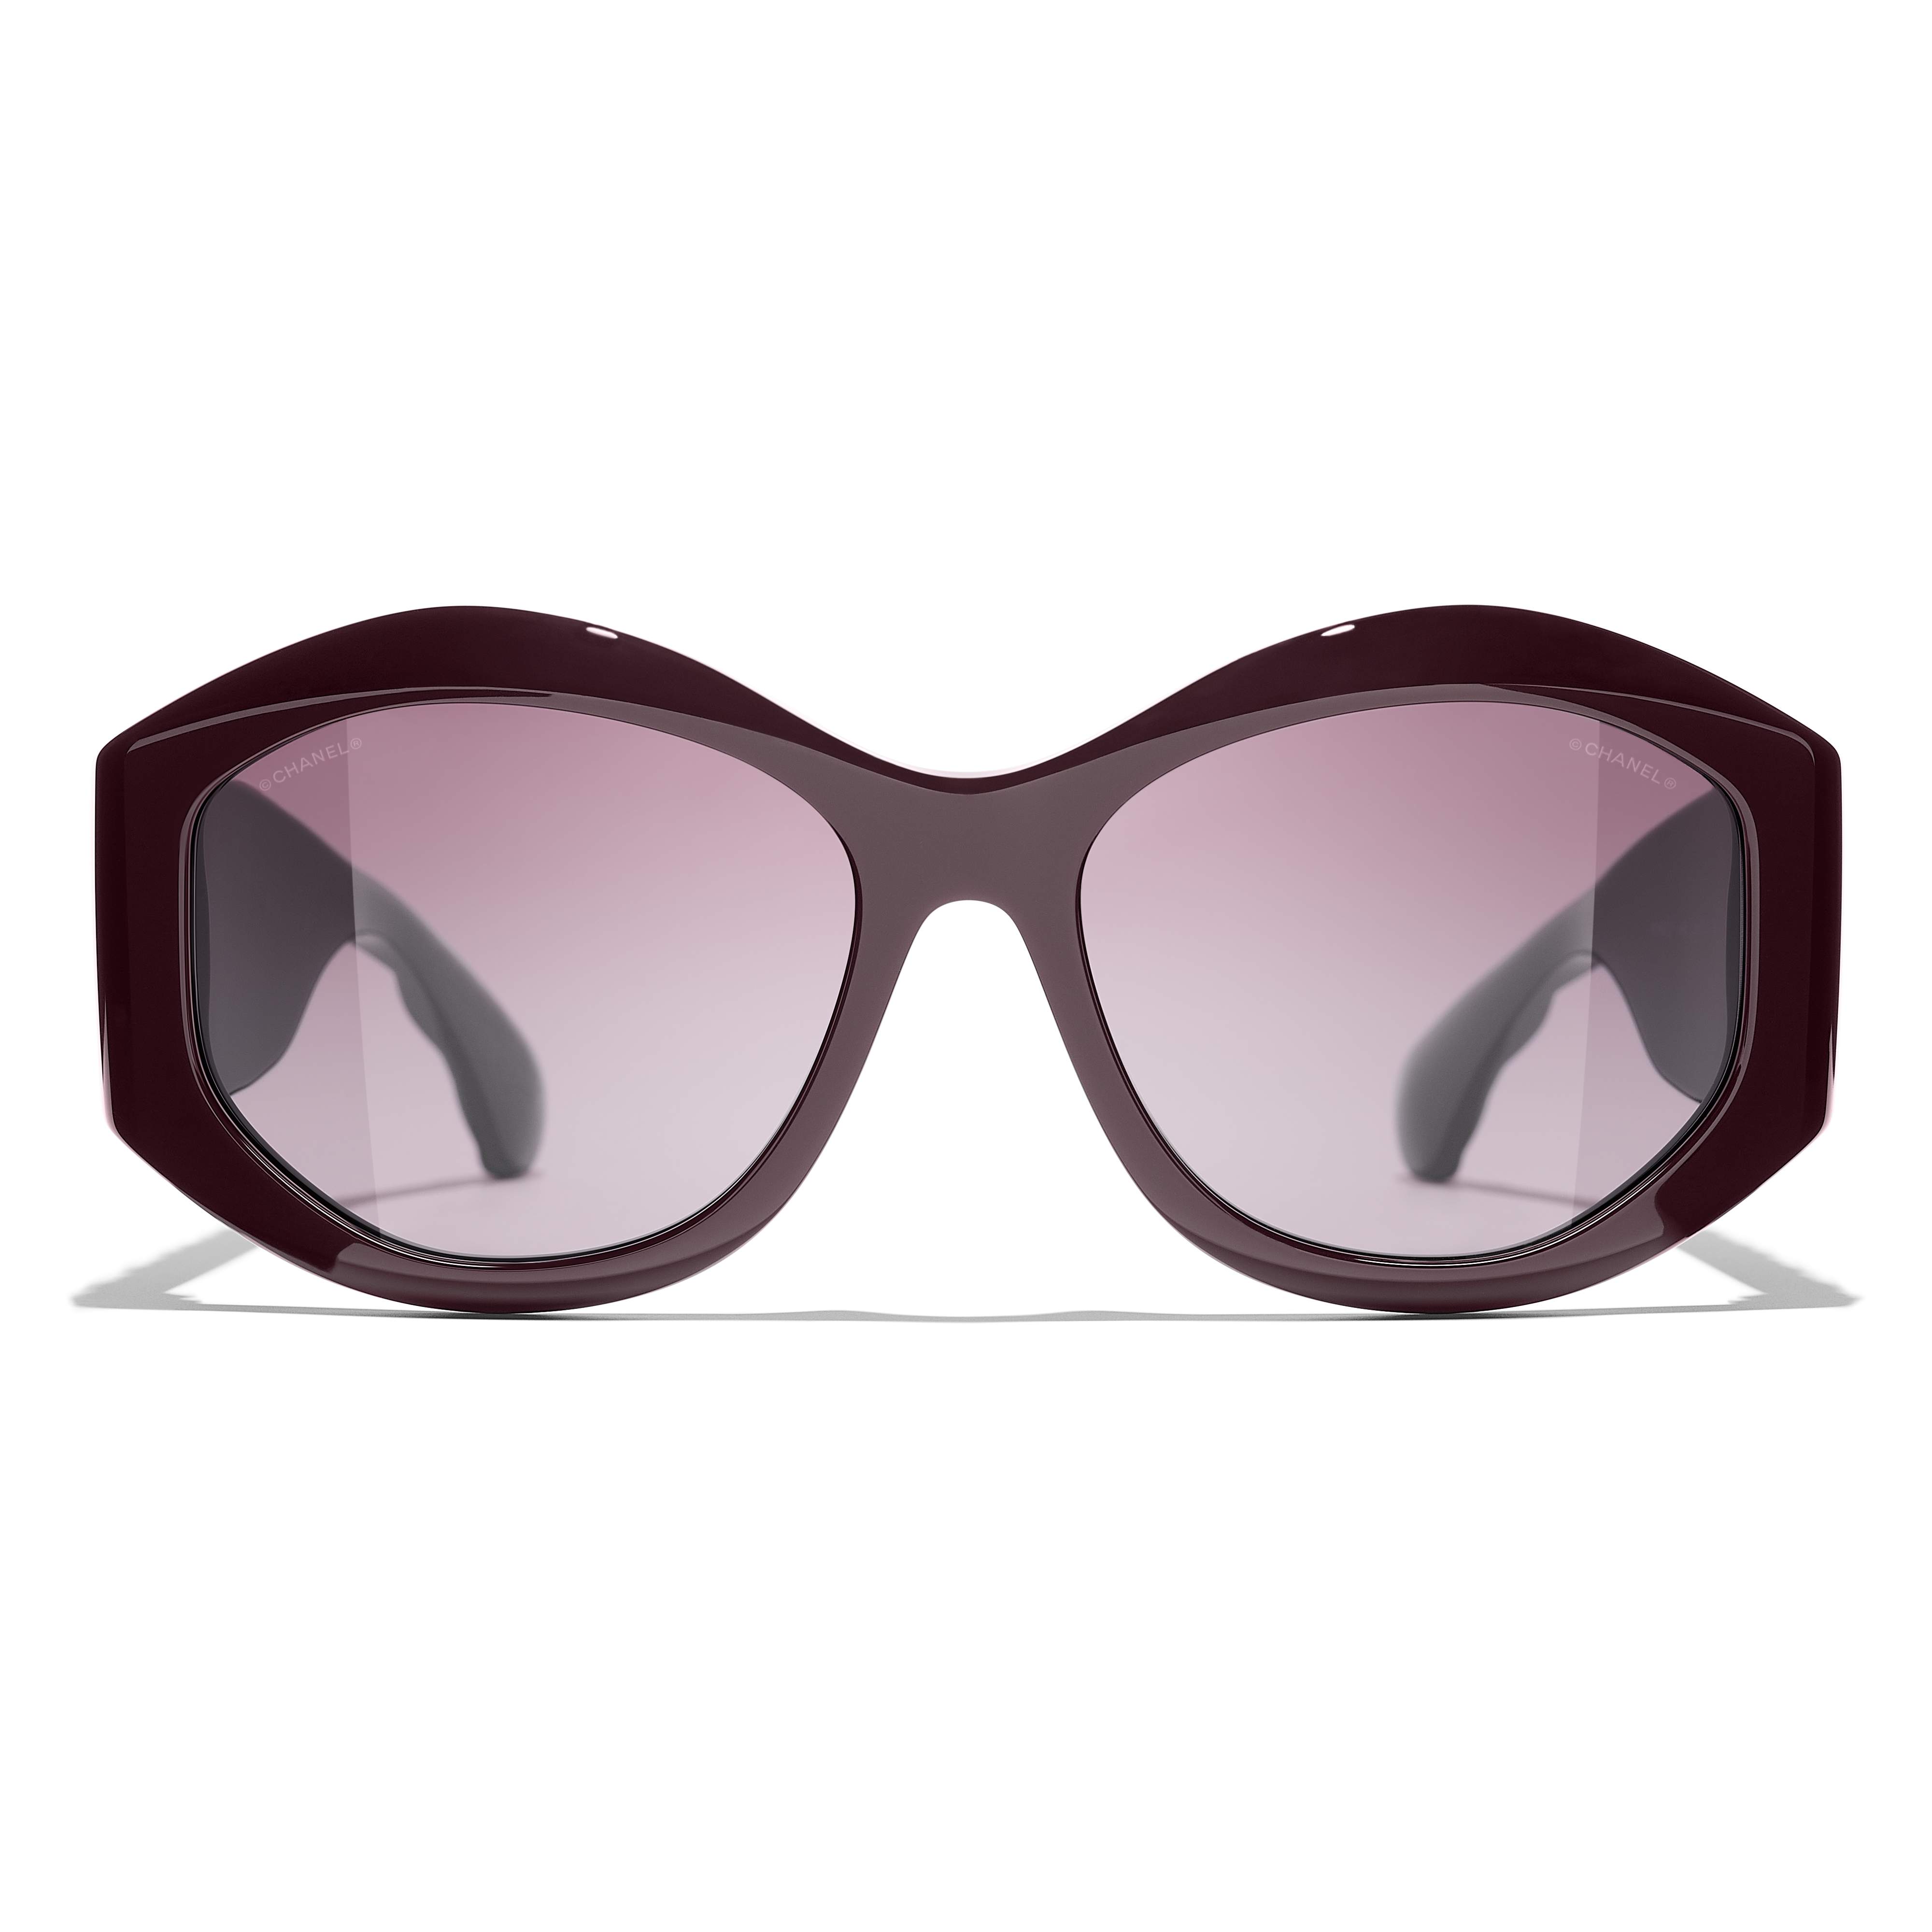 Sunglasses CHANEL CH5486 1461/S1 56-17 Bordeaux in stock | Price 262,50 € |  Visiofactory